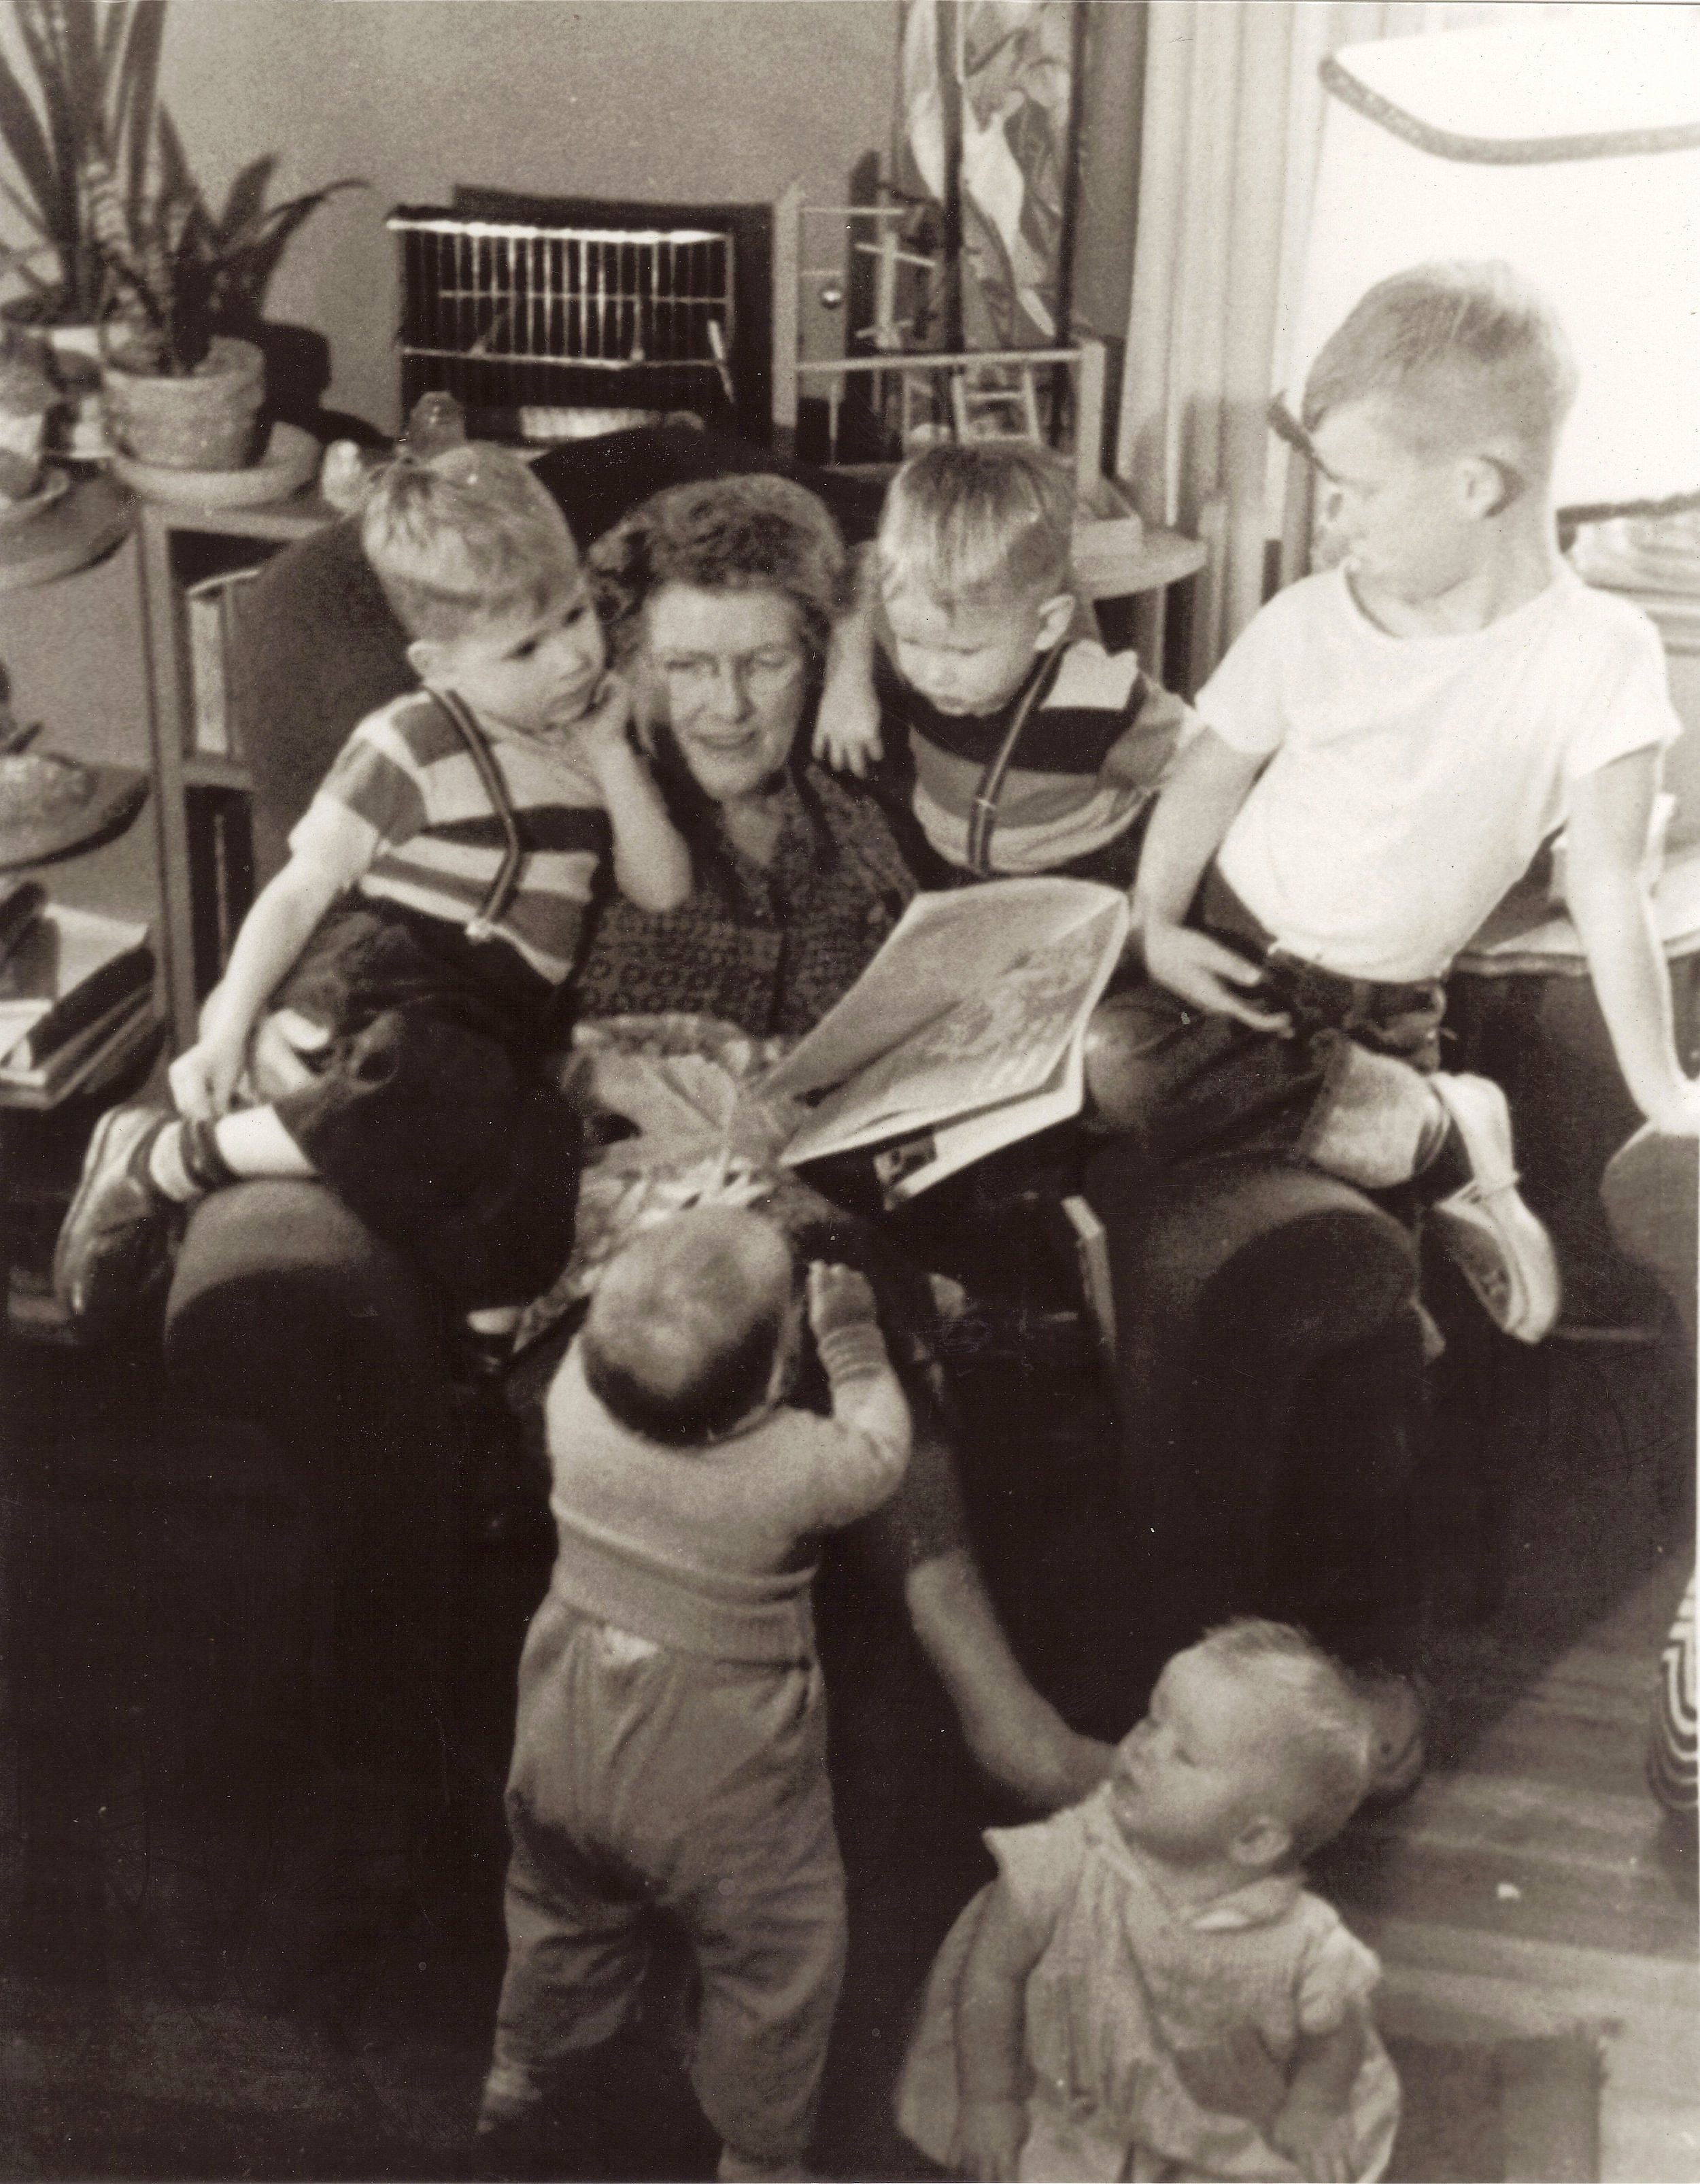  Mabel Boyd Davis Sr., who we called Muna, with some of her grandchildren, circa 1952. Clockwise from left: Peter, Chug, Andy, Ellen, Rick 